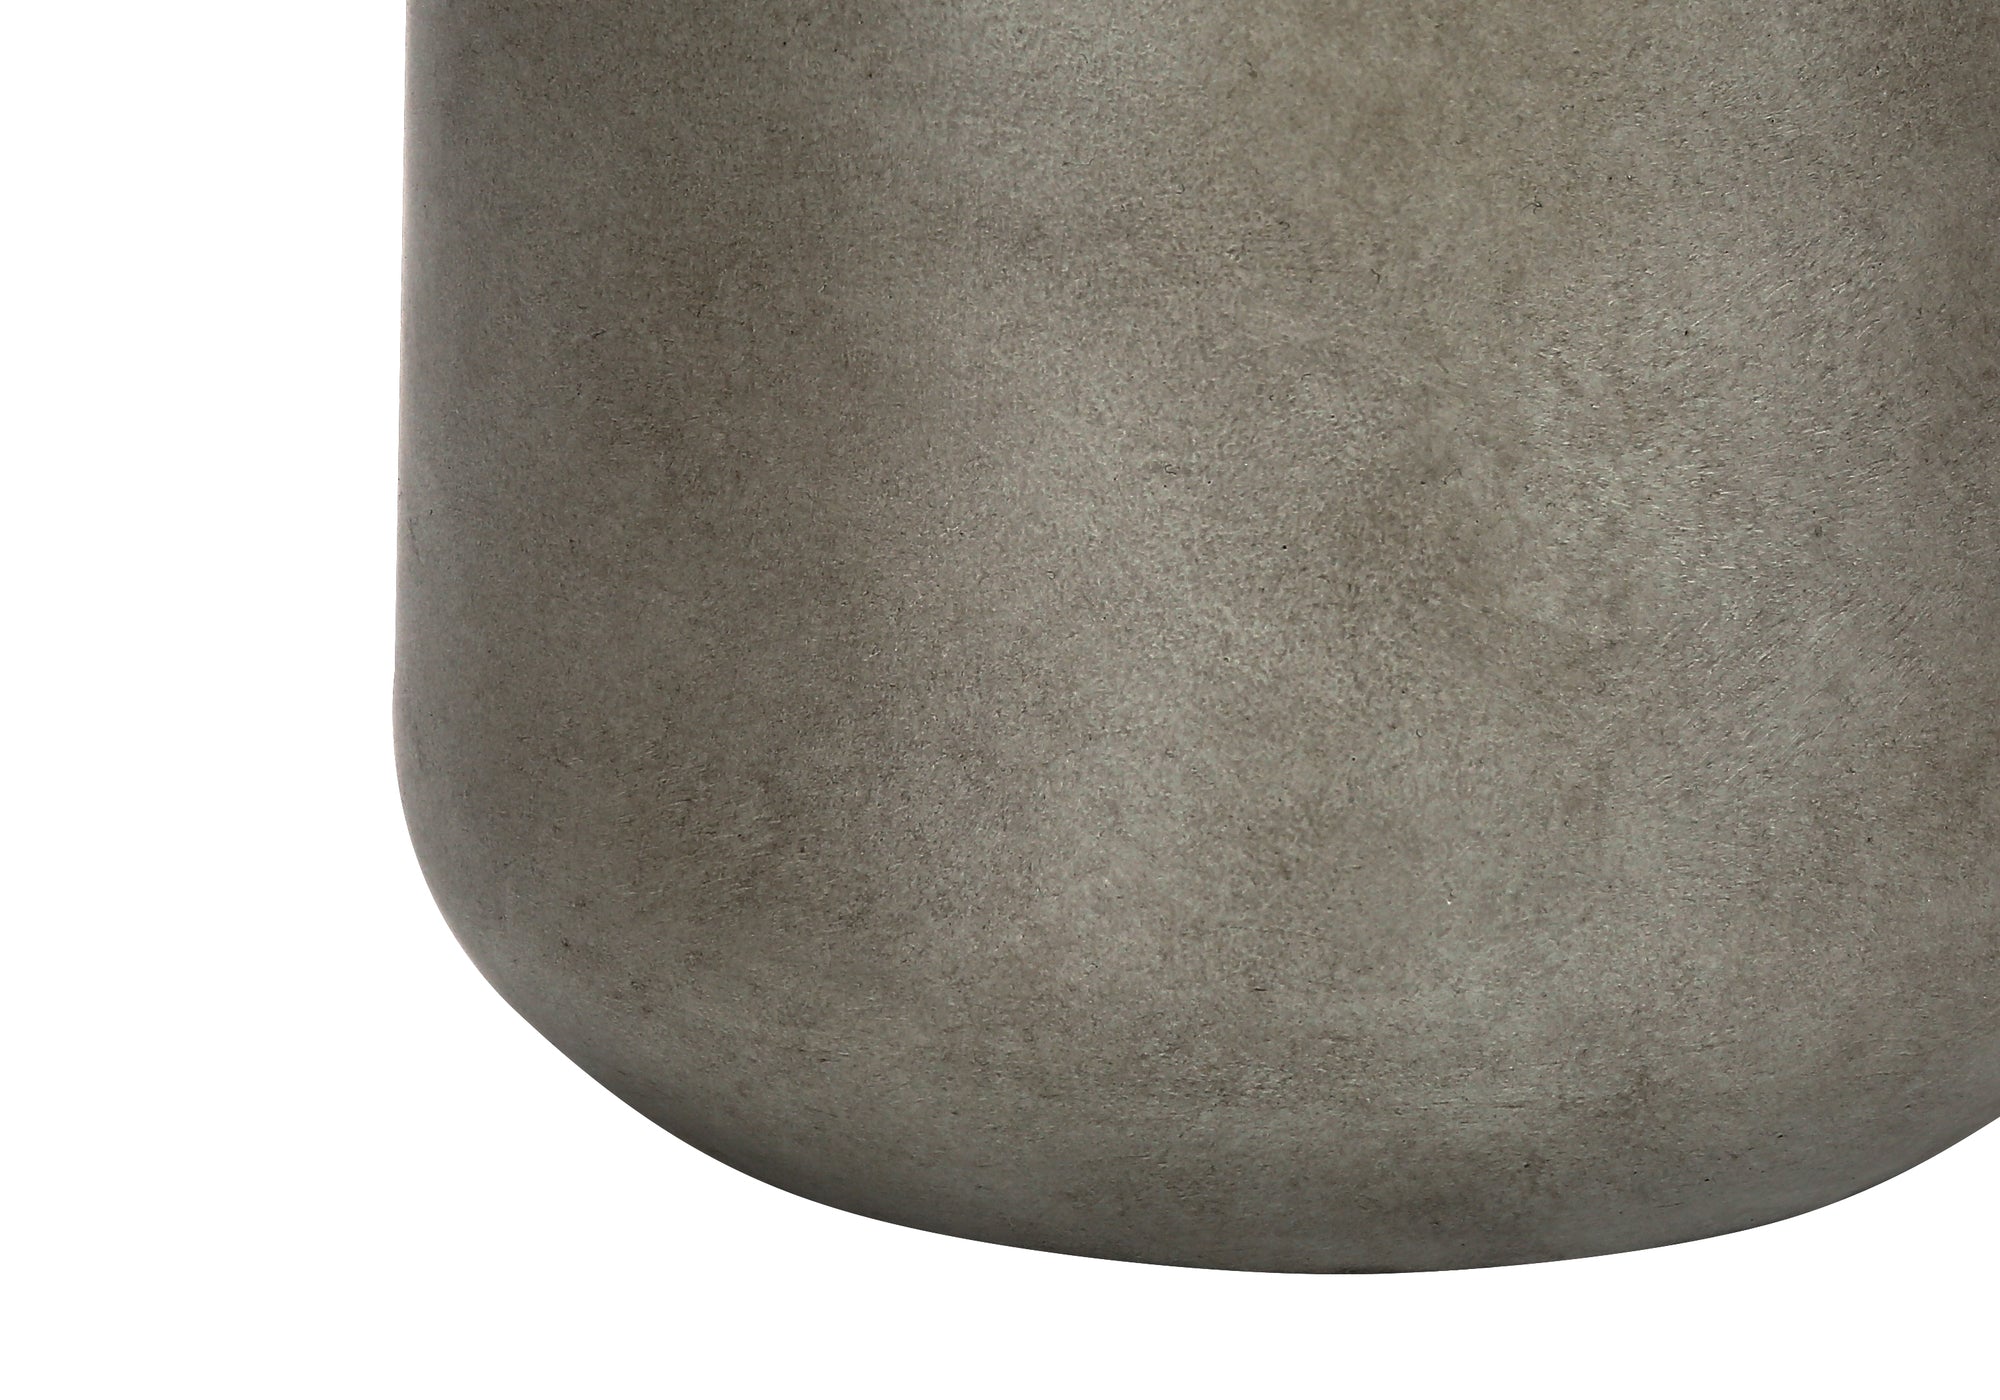 MN-379703    Lighting, 24"H, Table Lamp, Grey Concrete, Beige Shade, Contemporary